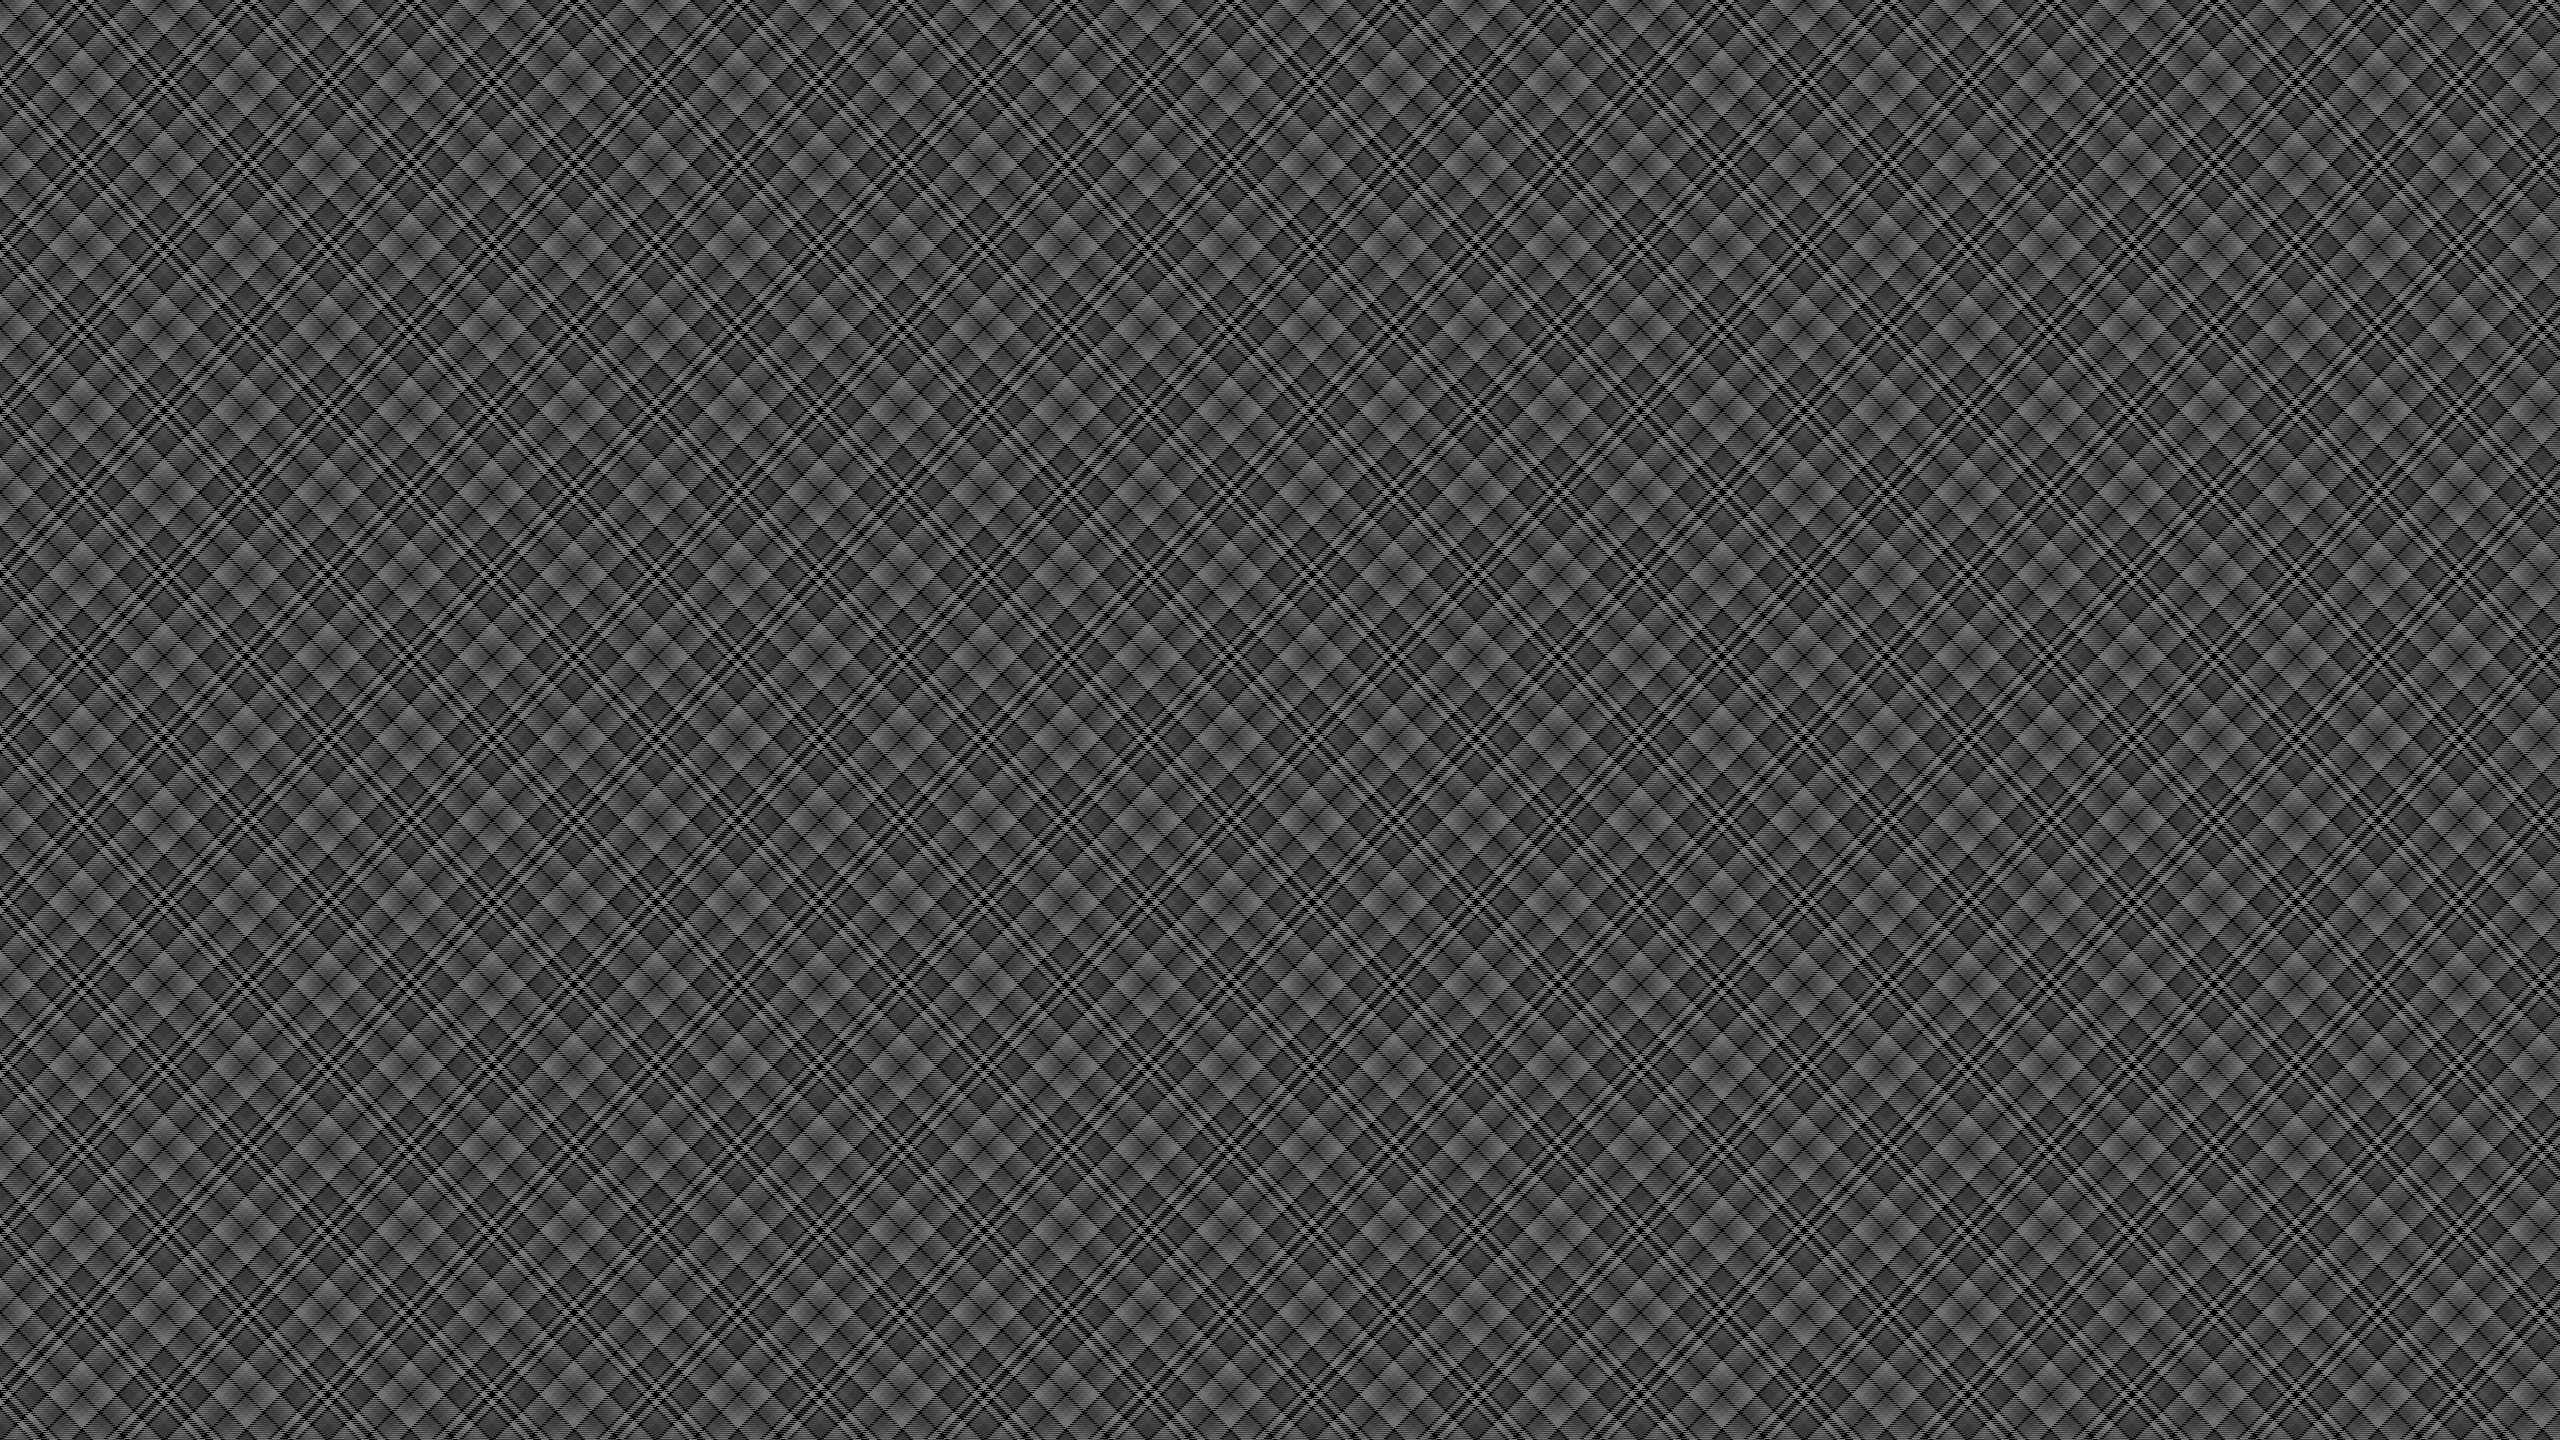 this Black Plaid Desktop Wallpaper is easy Just save the wallpaper